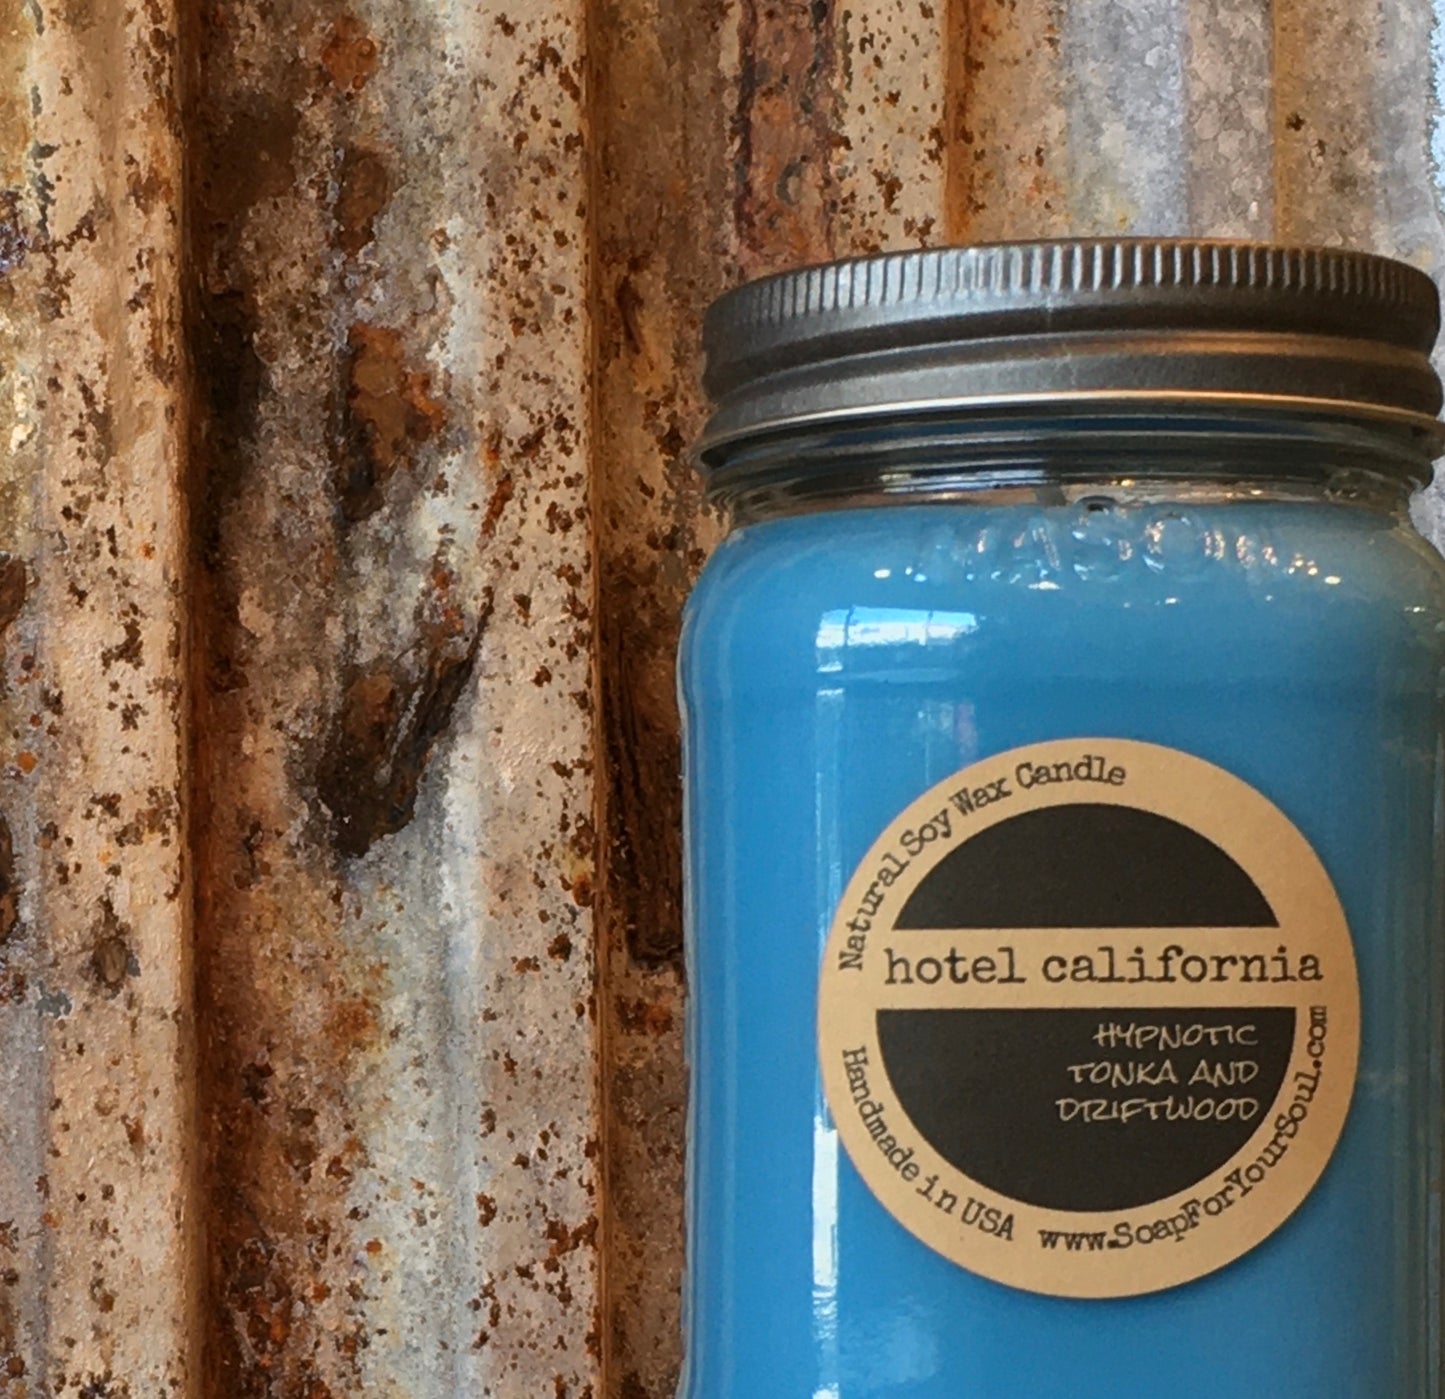 Hotel California scented Soy Candle